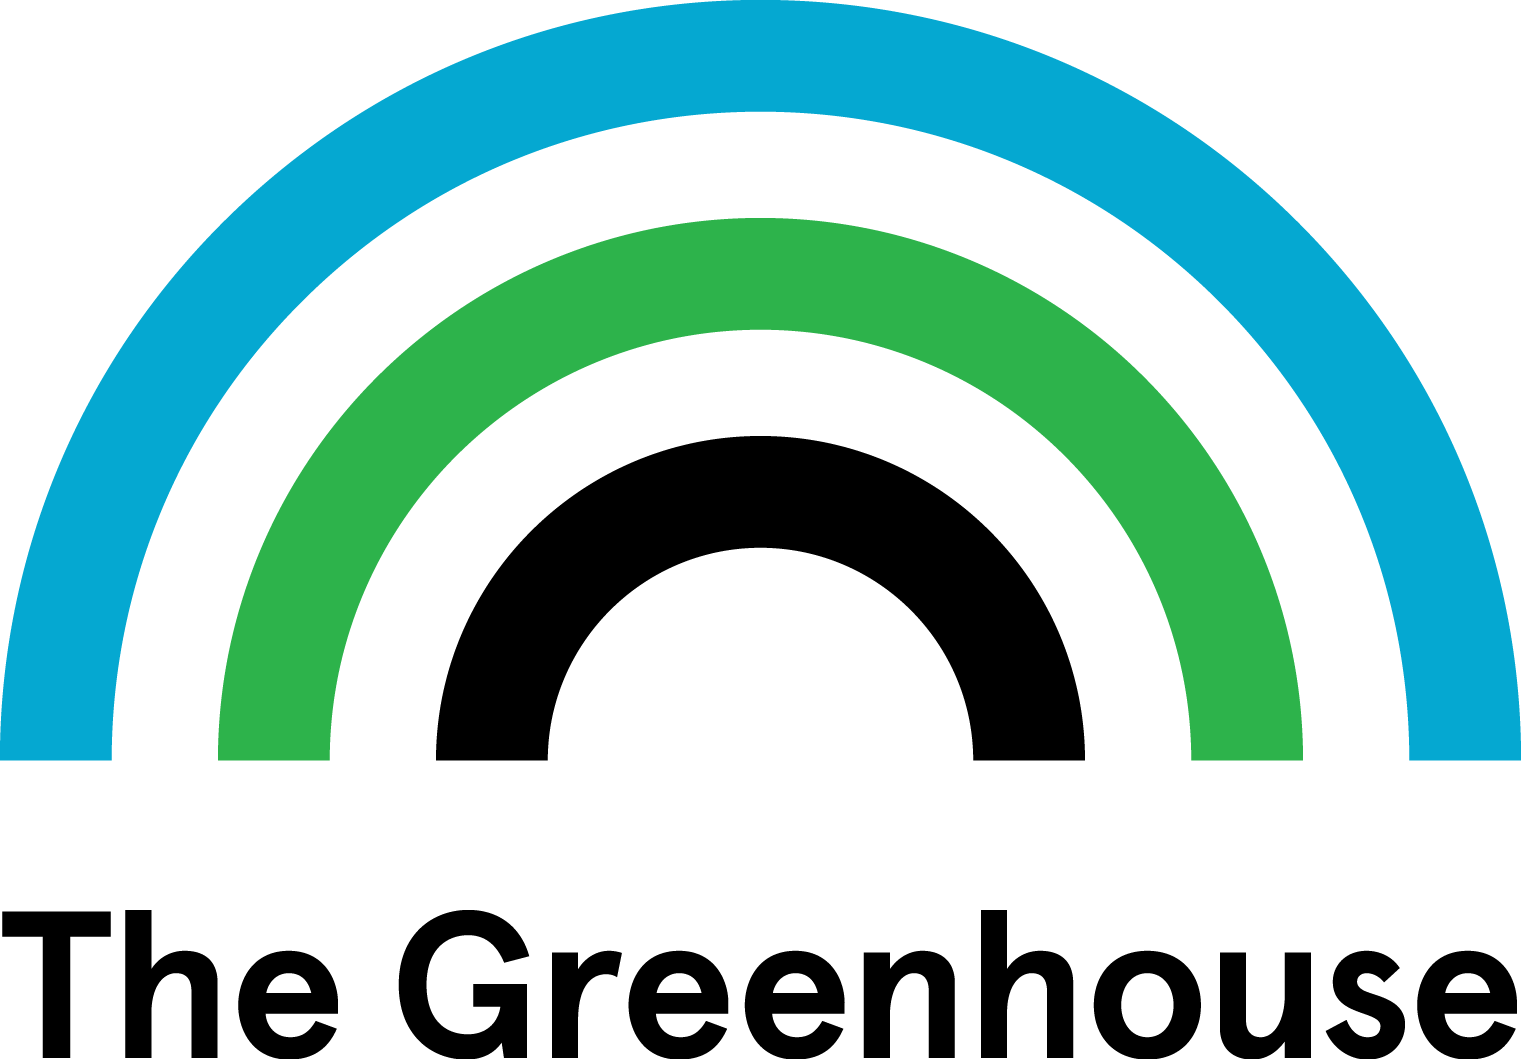 The GreenHouse